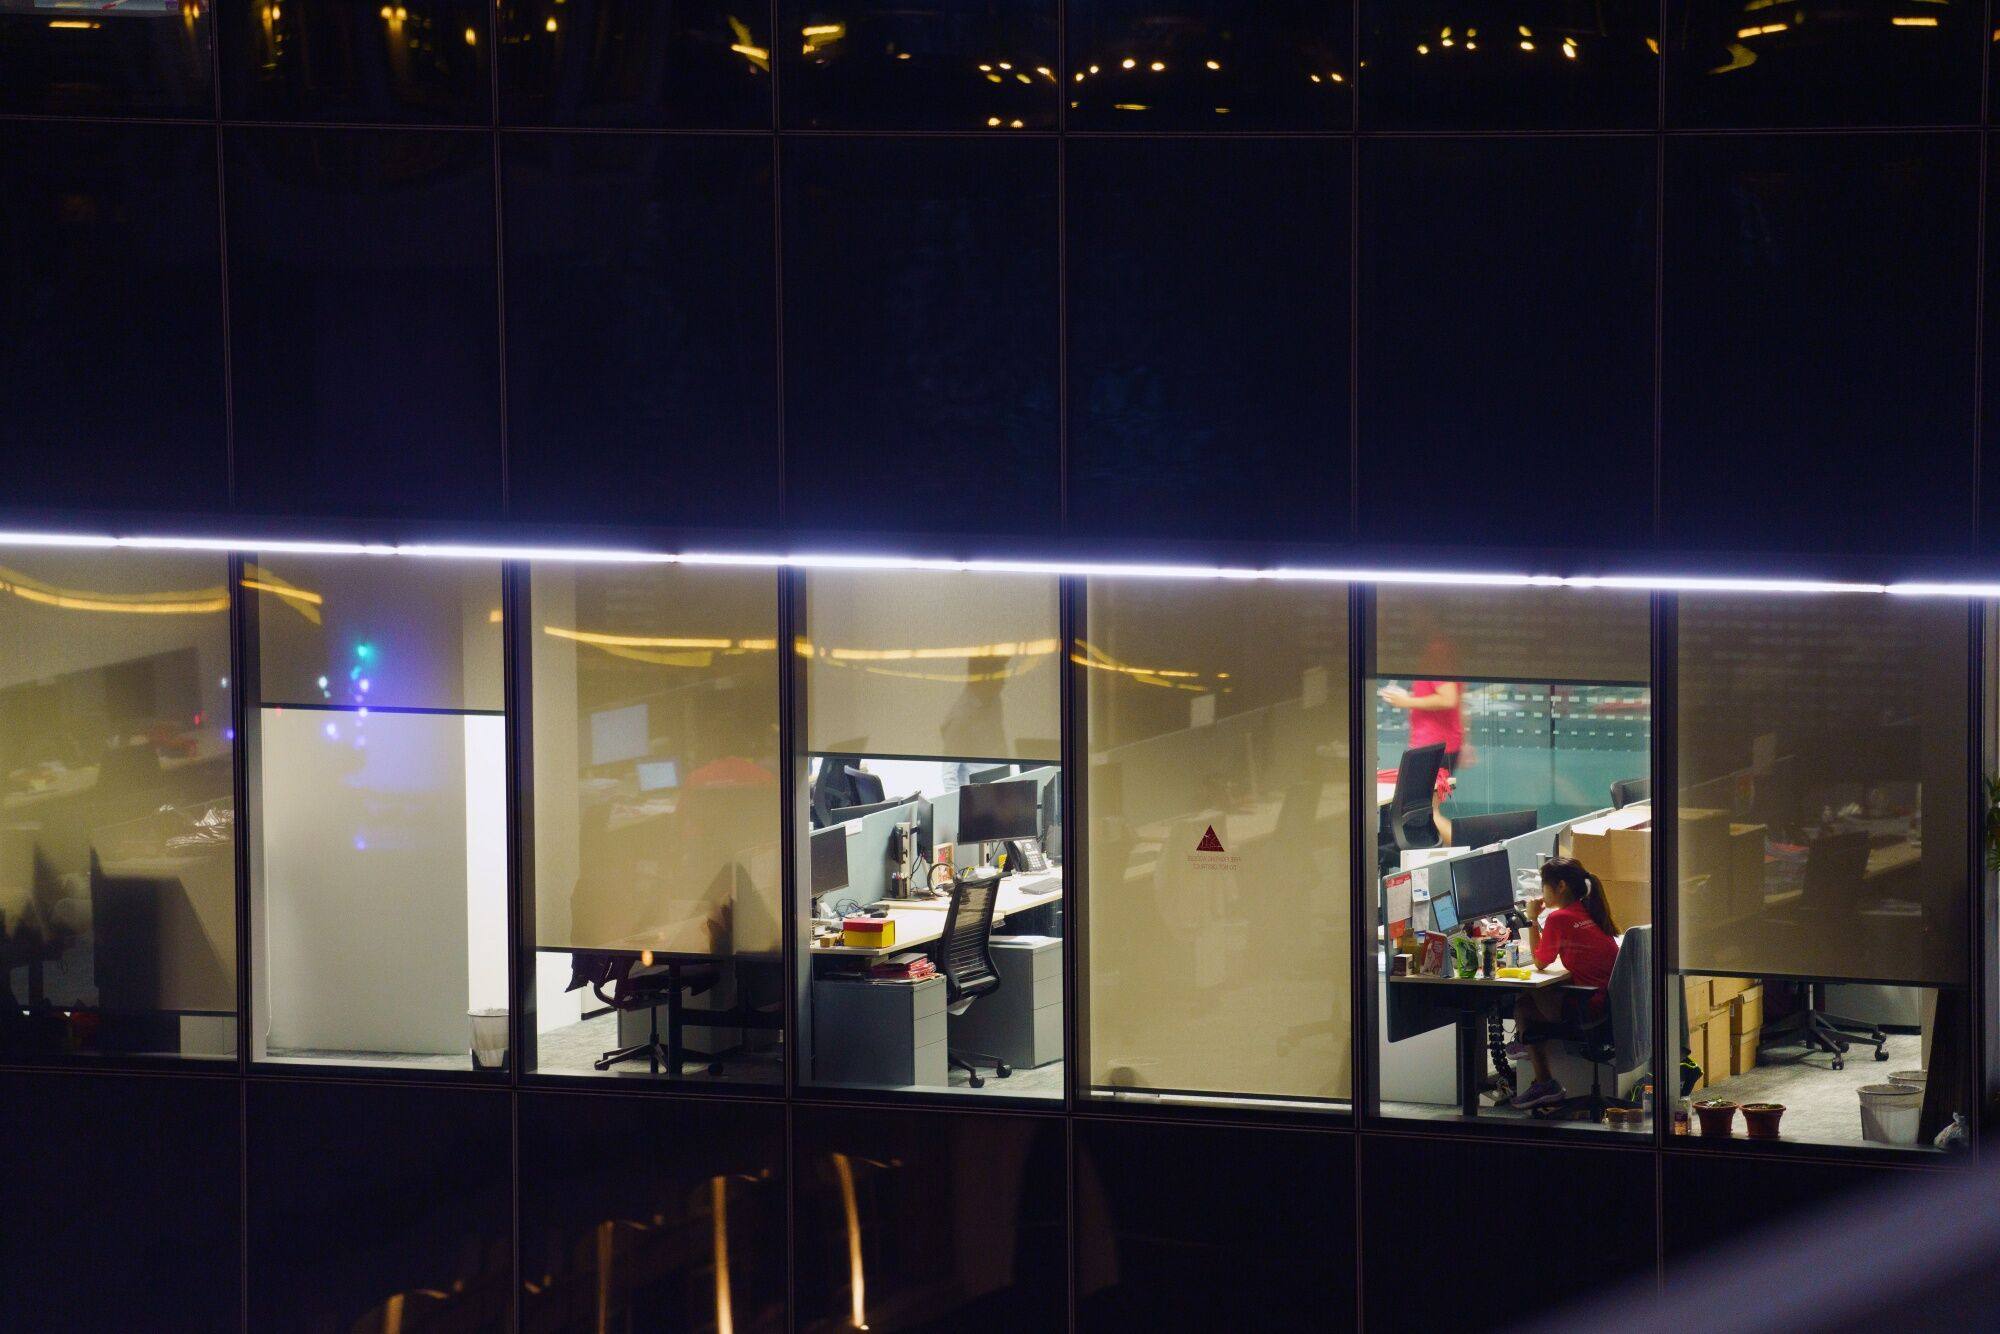 Office workers are seen at night through the windows of a commercial building in the central business district of Singapore. Photo: Bloomberg